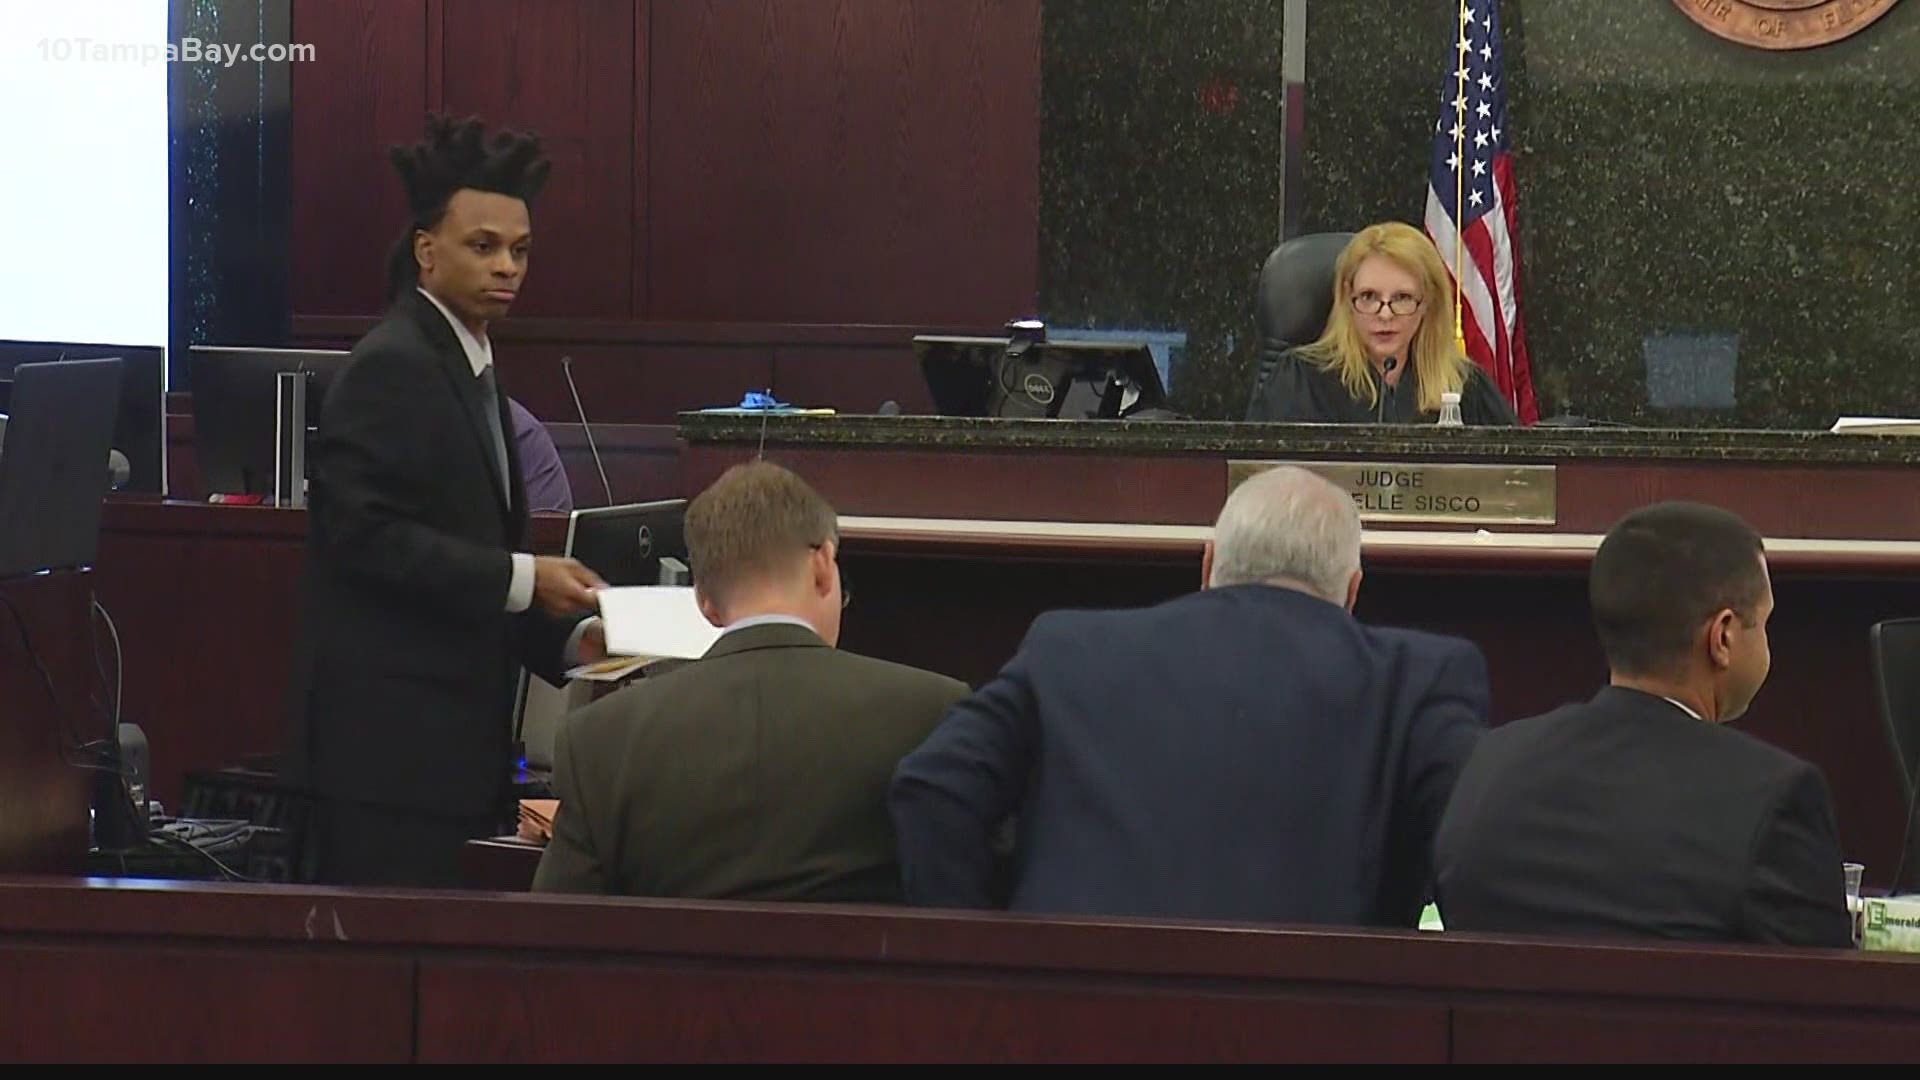 The juror was let go due to health issues. Both the state and Mr. Oneal have rested their cases.